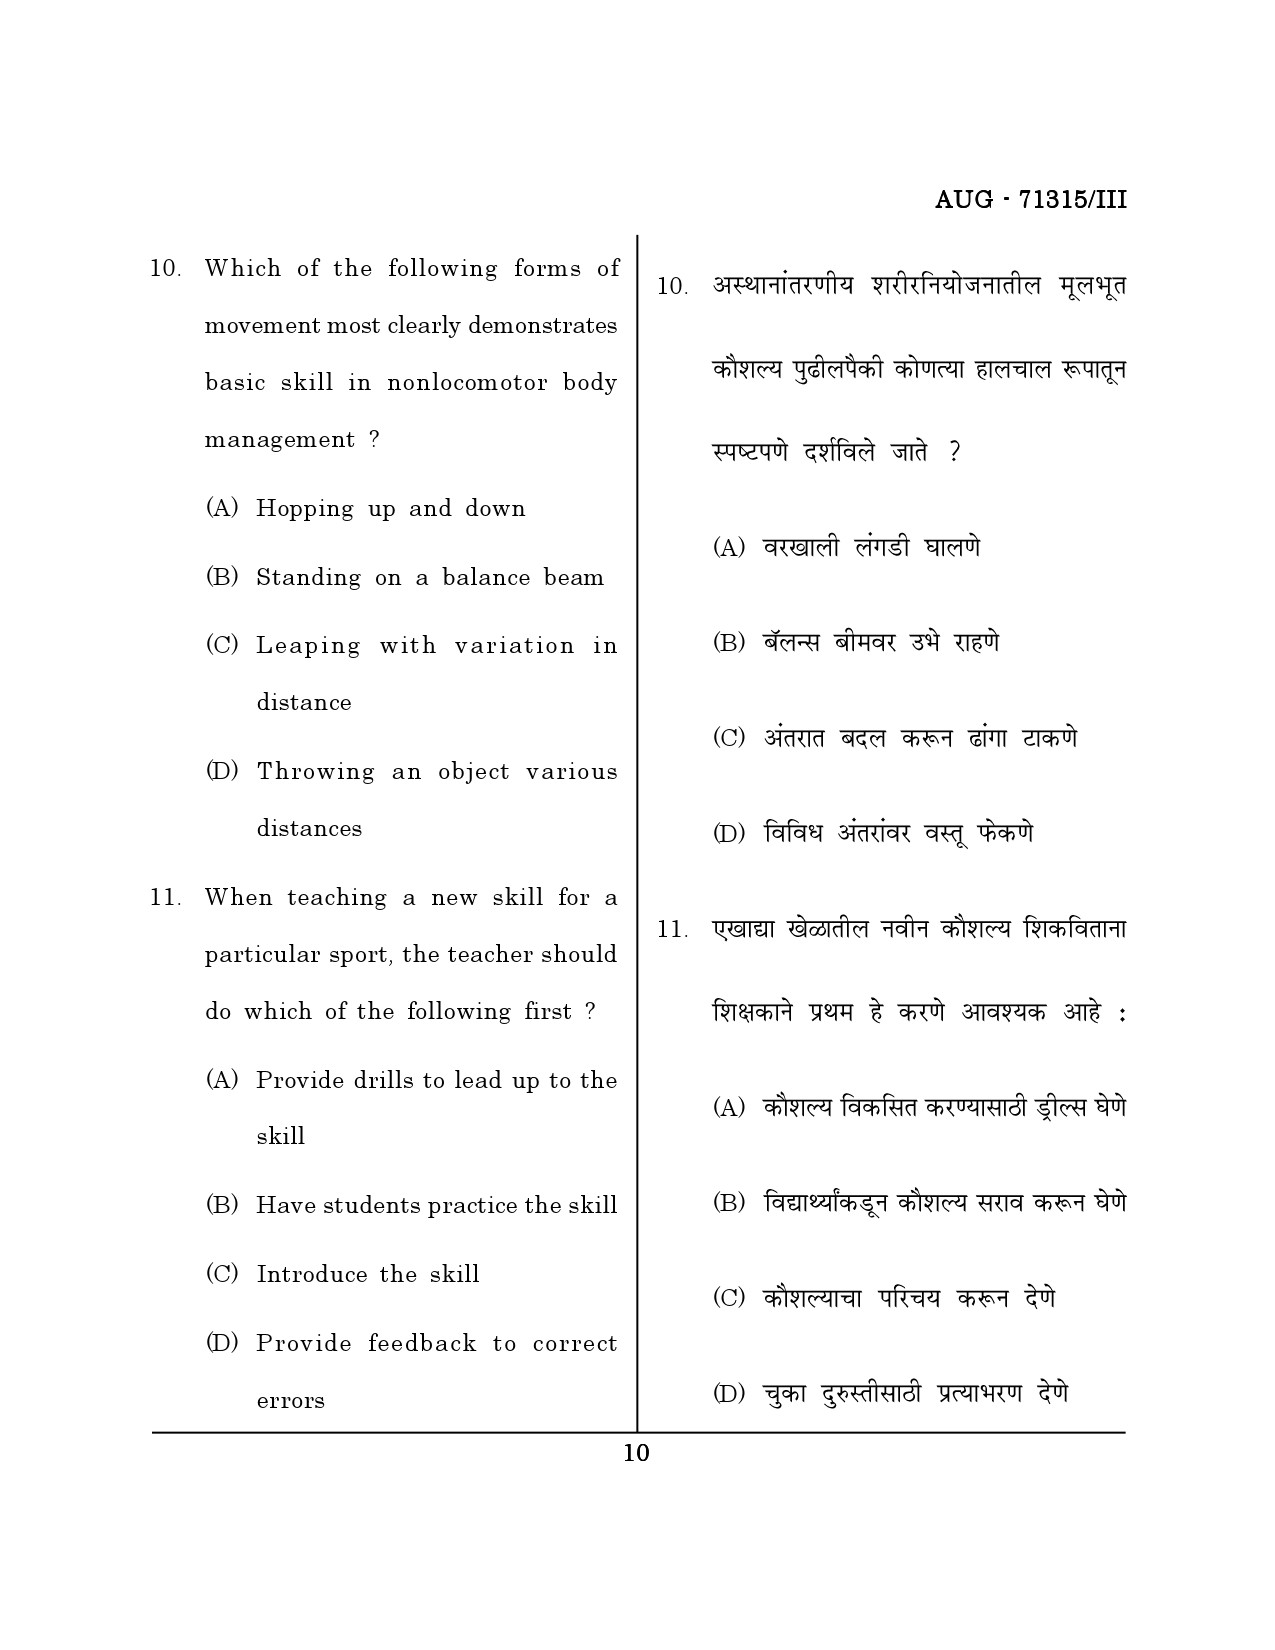 Maharashtra SET Physical Education Question Paper III August 2015 9